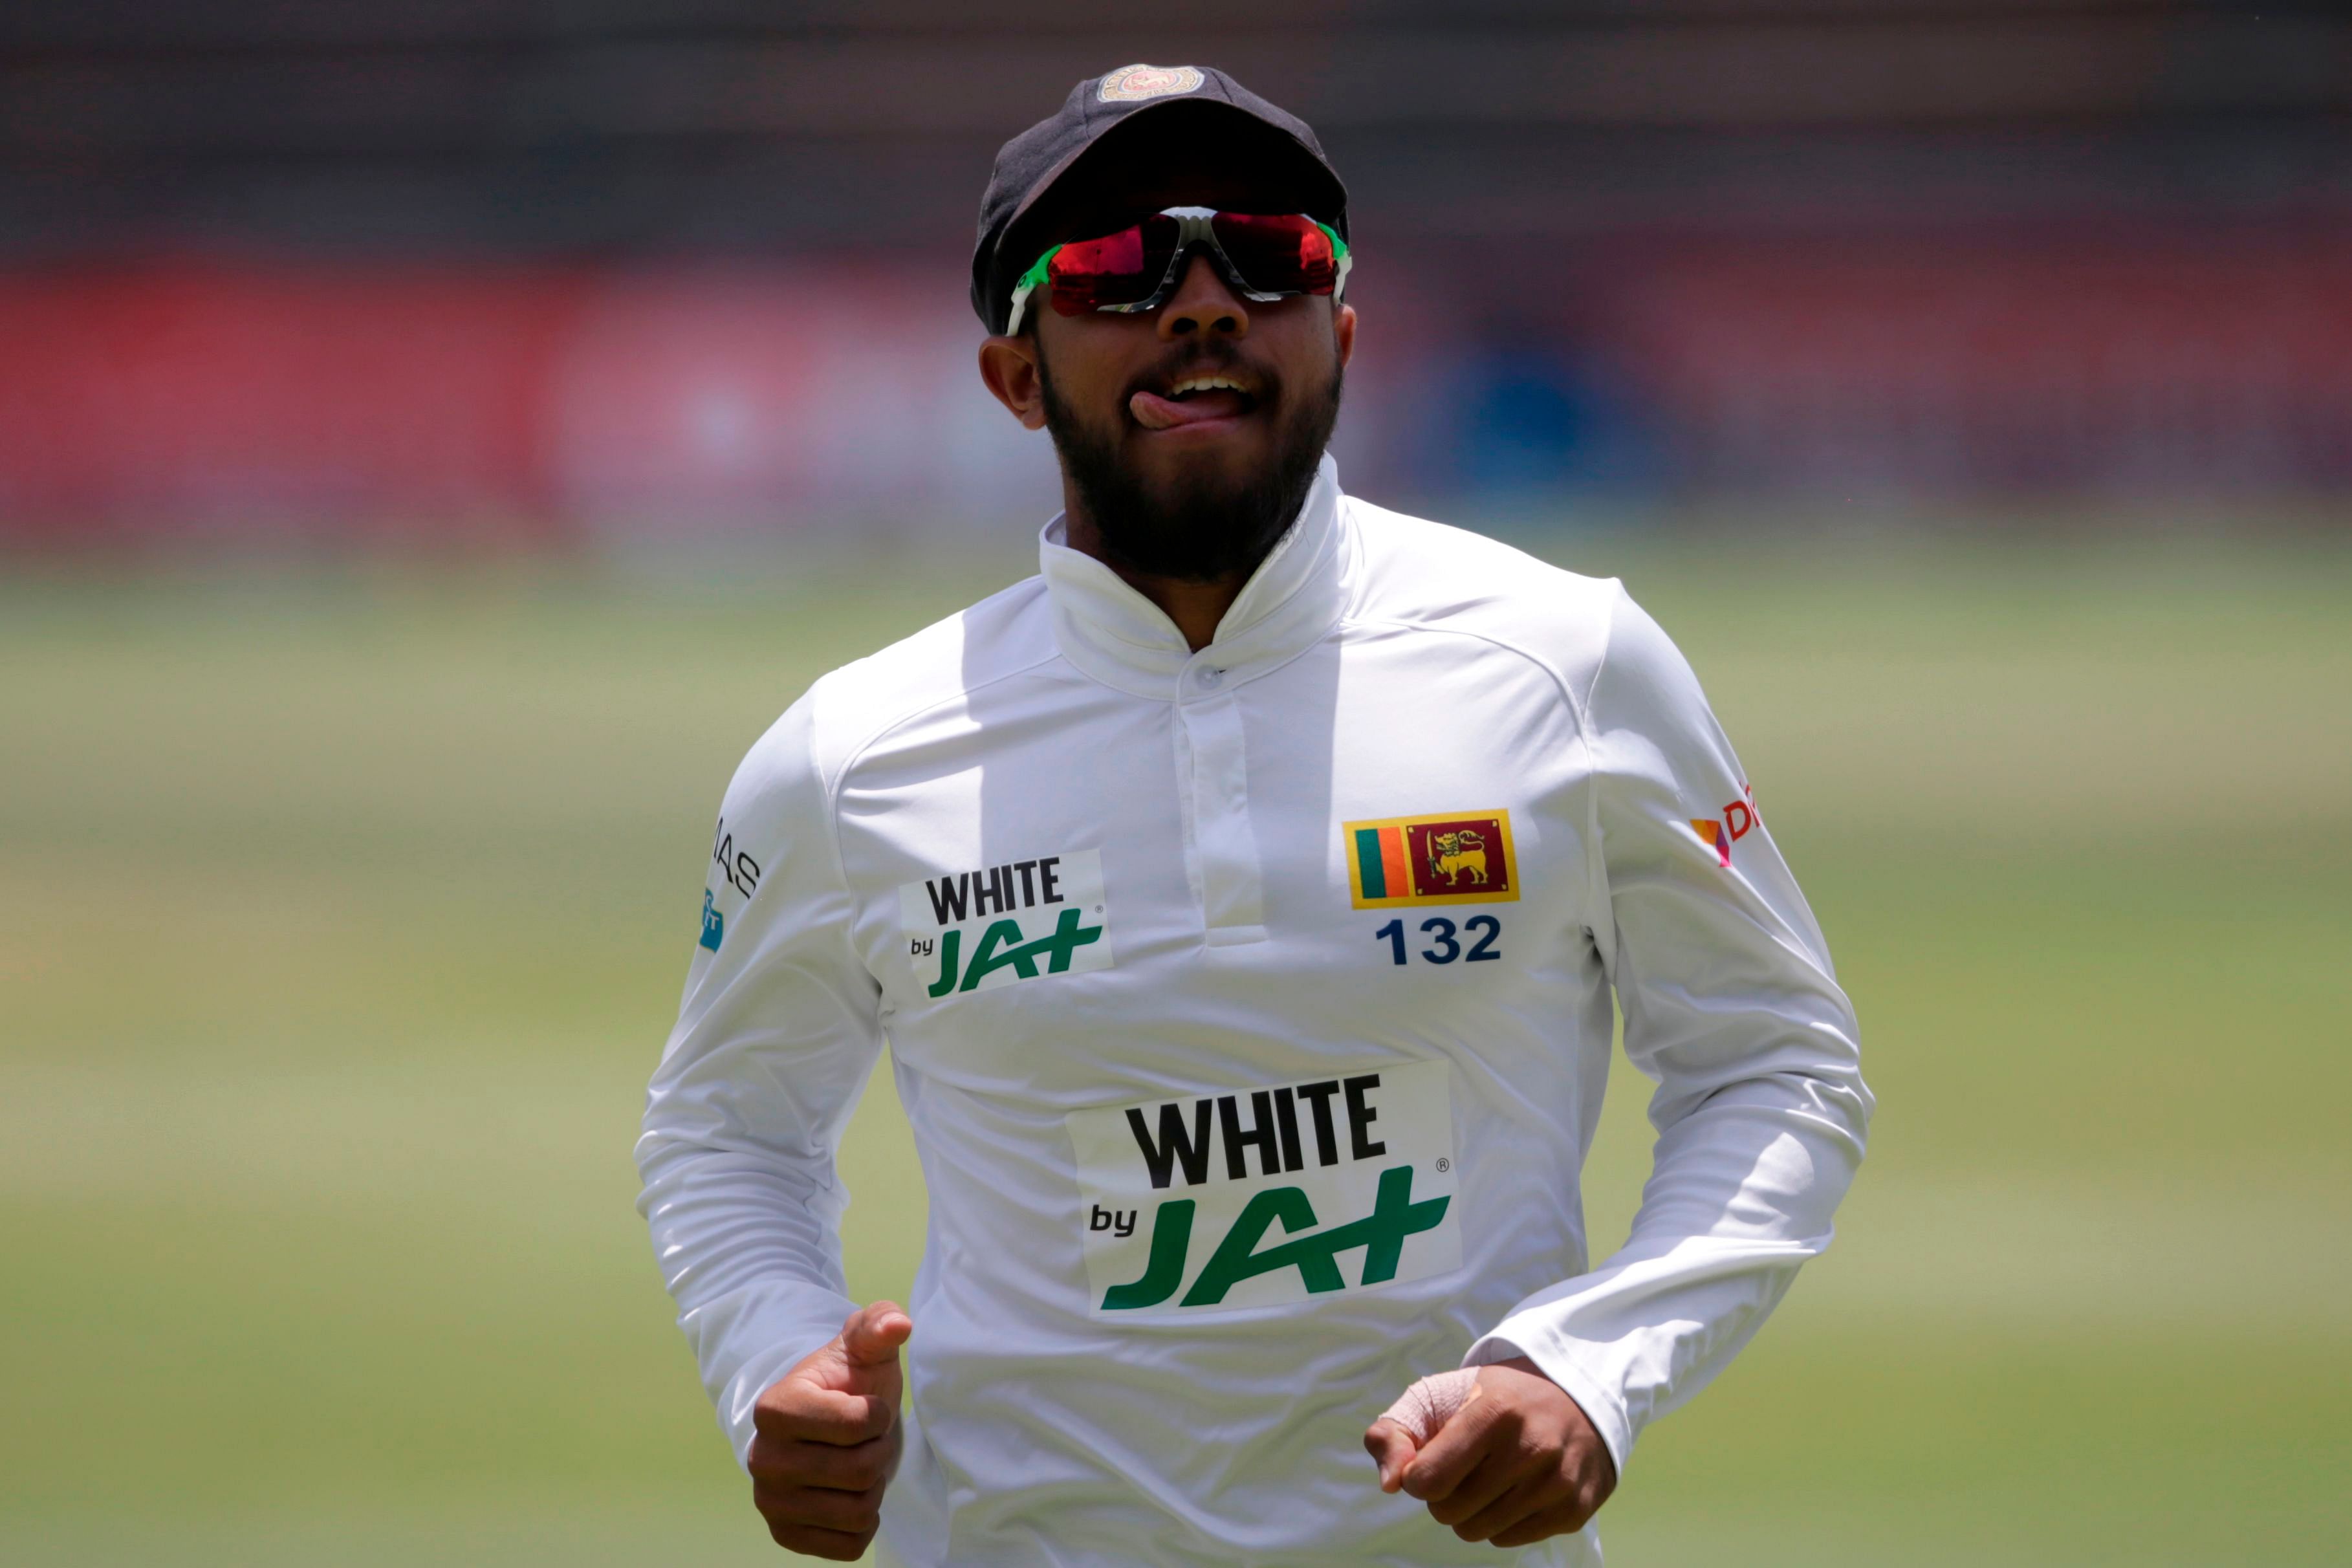 Kusal Mendis on the field during the second Test between South Africa and Sri Lanka in Johannesburg on Jan. 5, 2021. Credit: AFP Photo